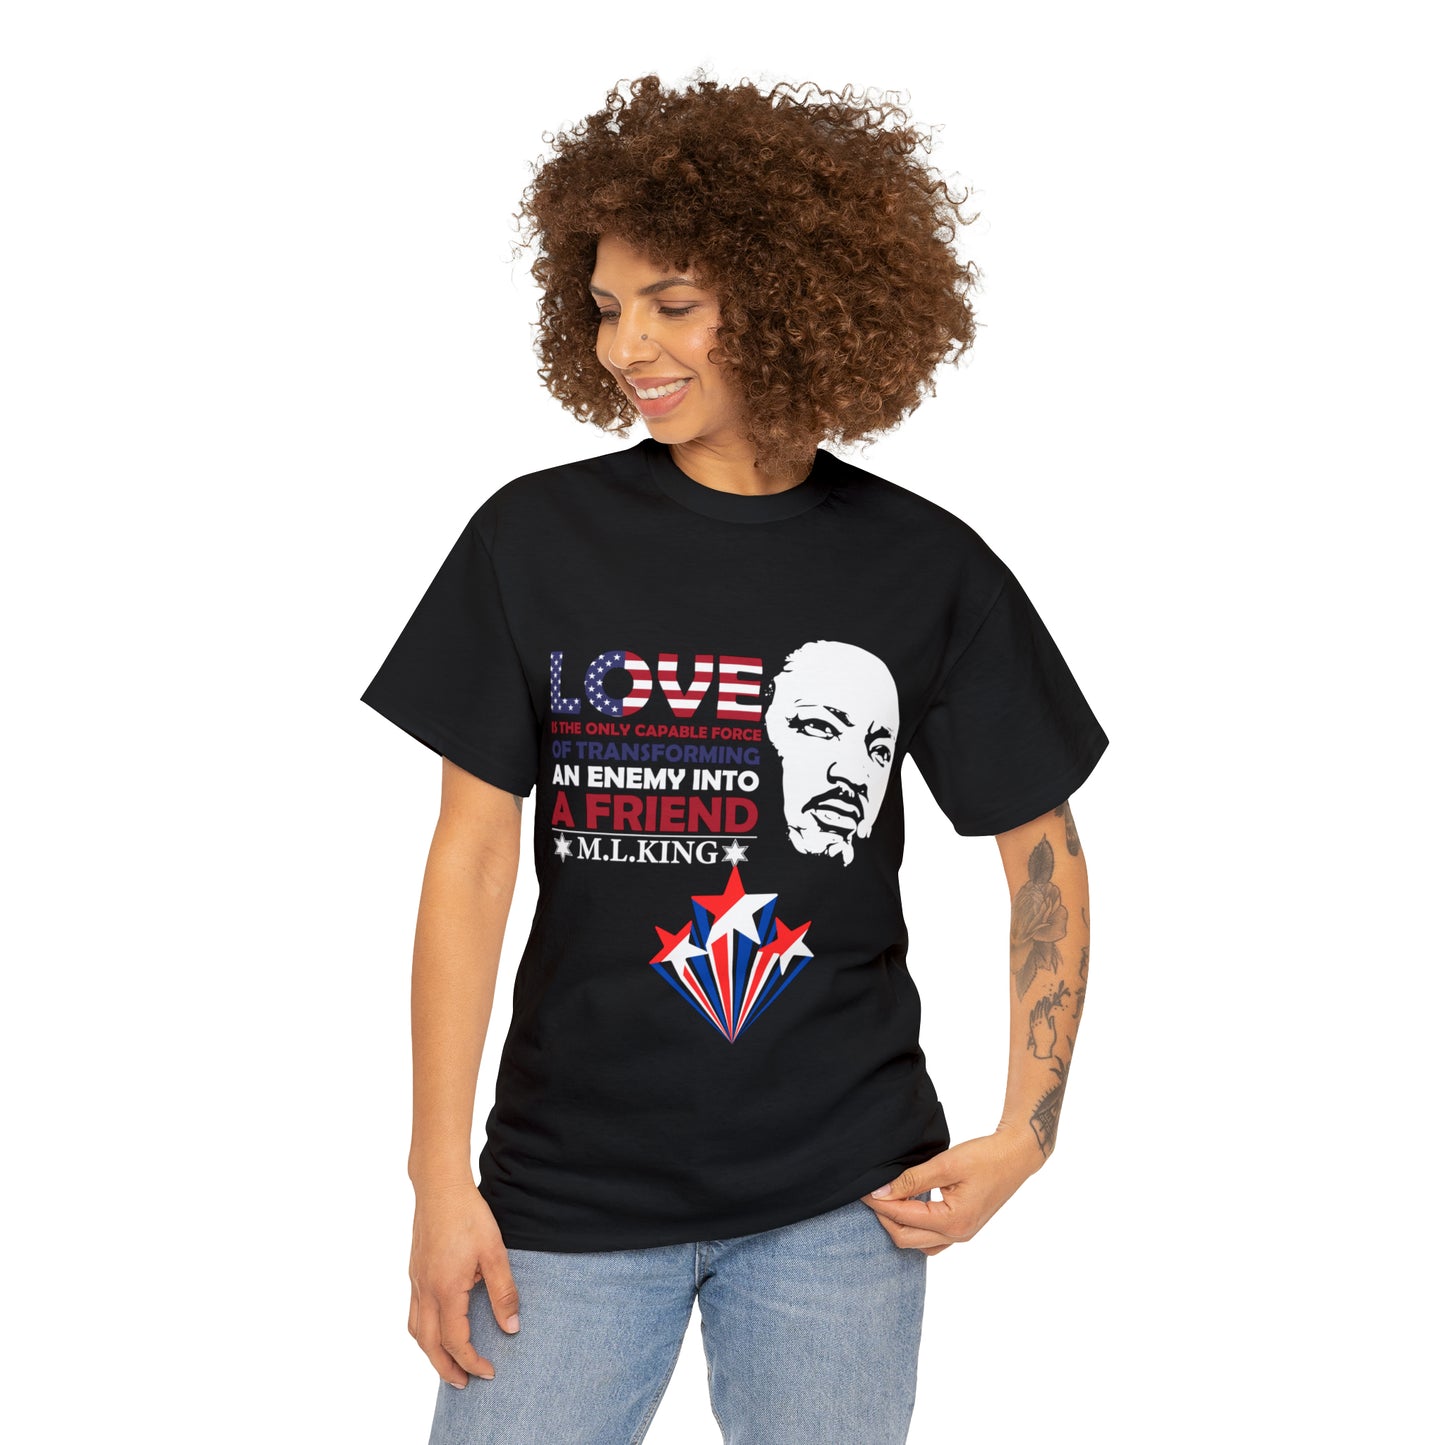 Men's T-shirt, MLK Black History, Modern T-shirt for any occasion, perfect gift